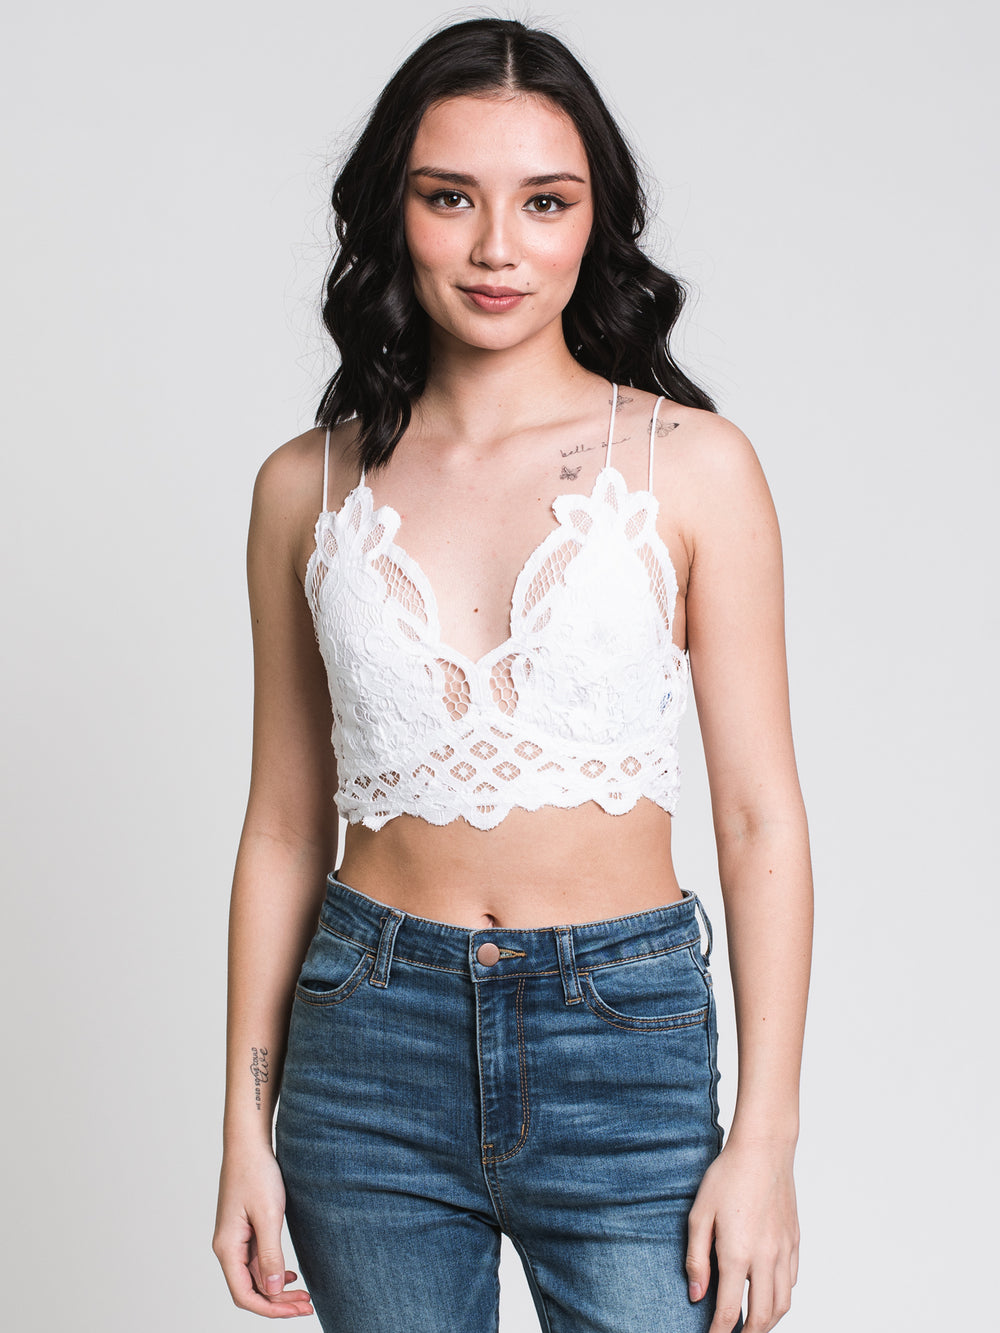 FREE PEOPLE ADELLA BRALETTE - WHITE - CLEARANCE